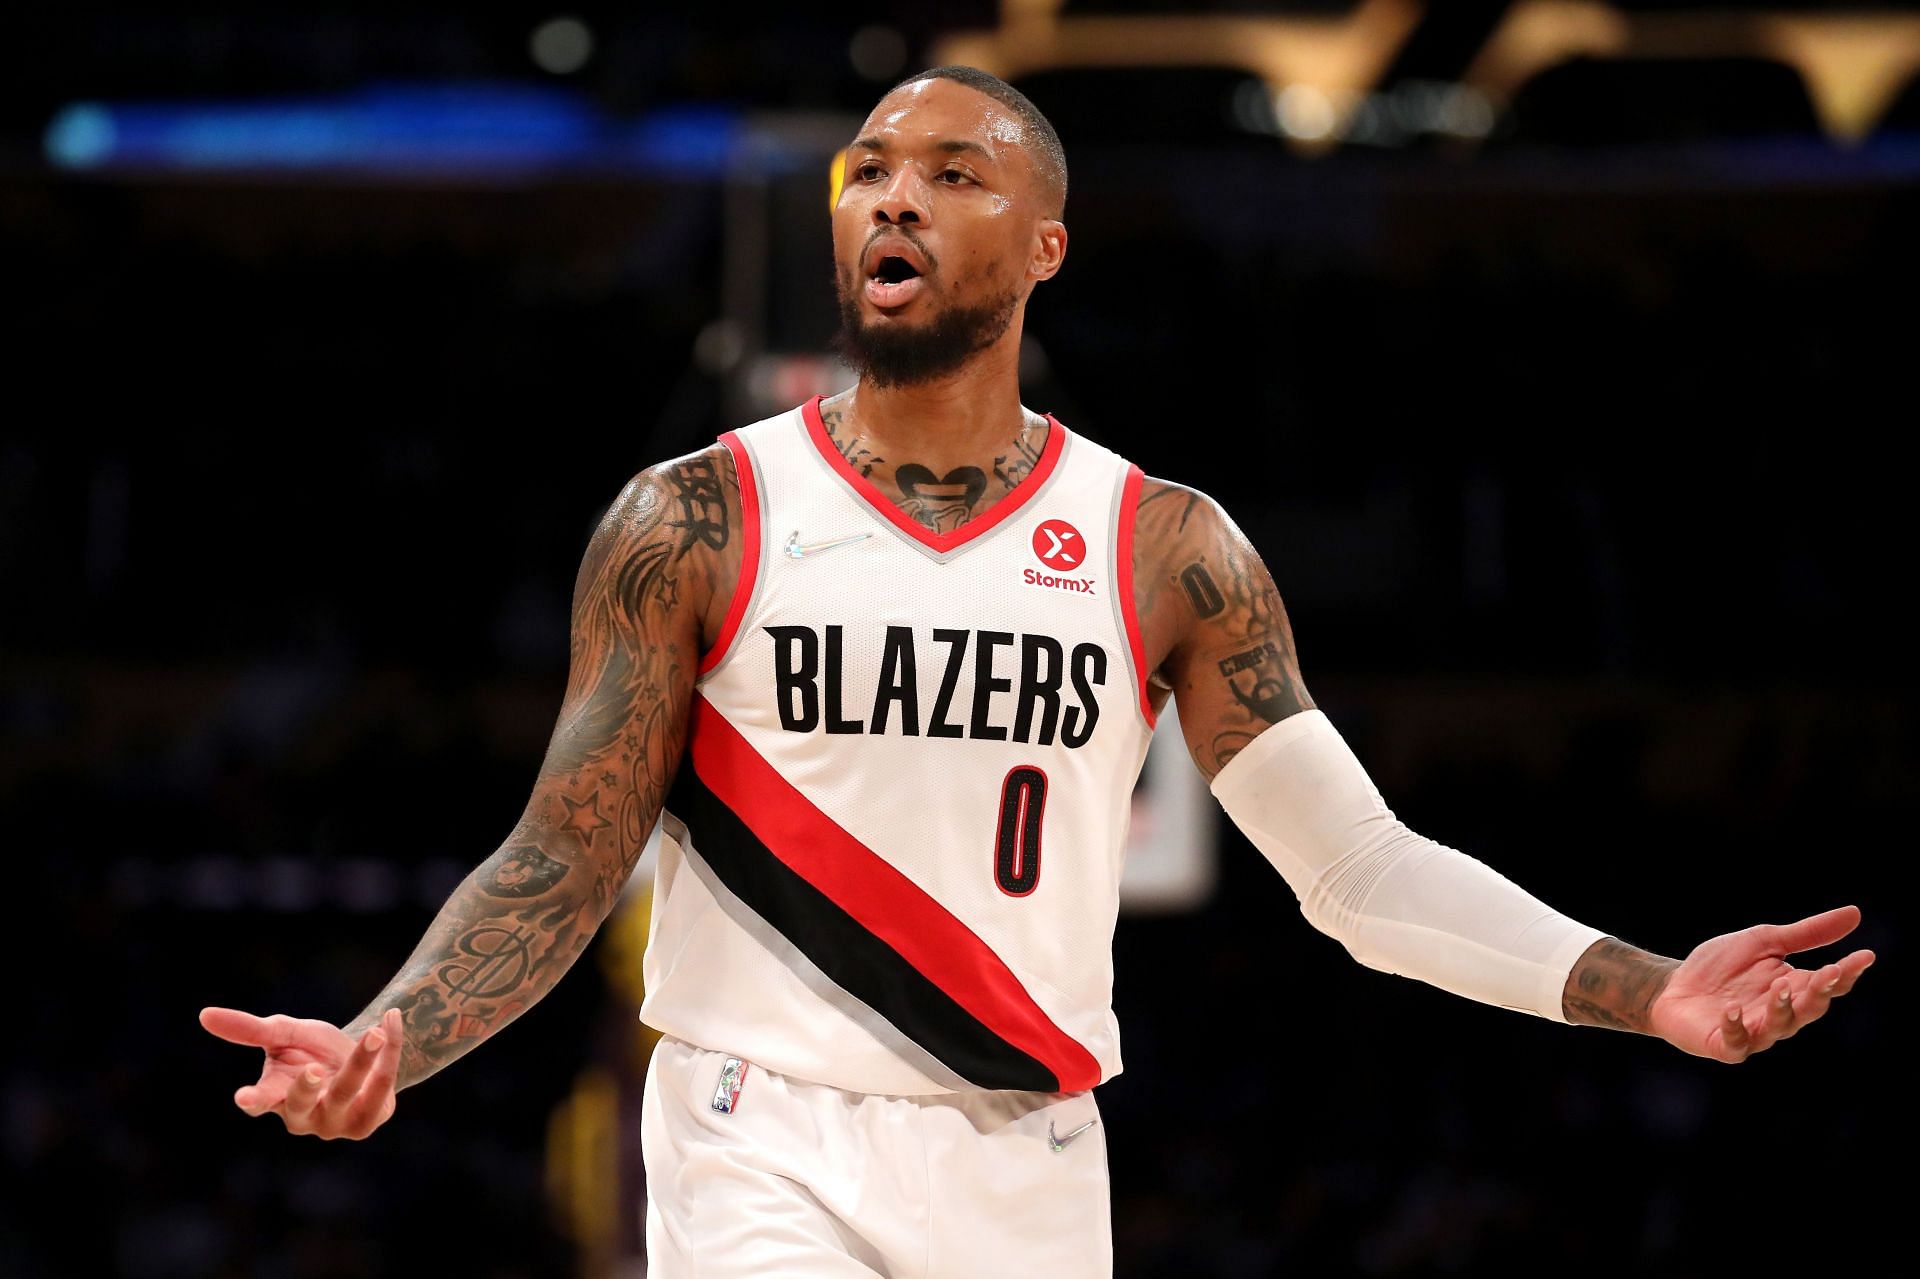 Damian Lillard will be out for this matchup against Denver